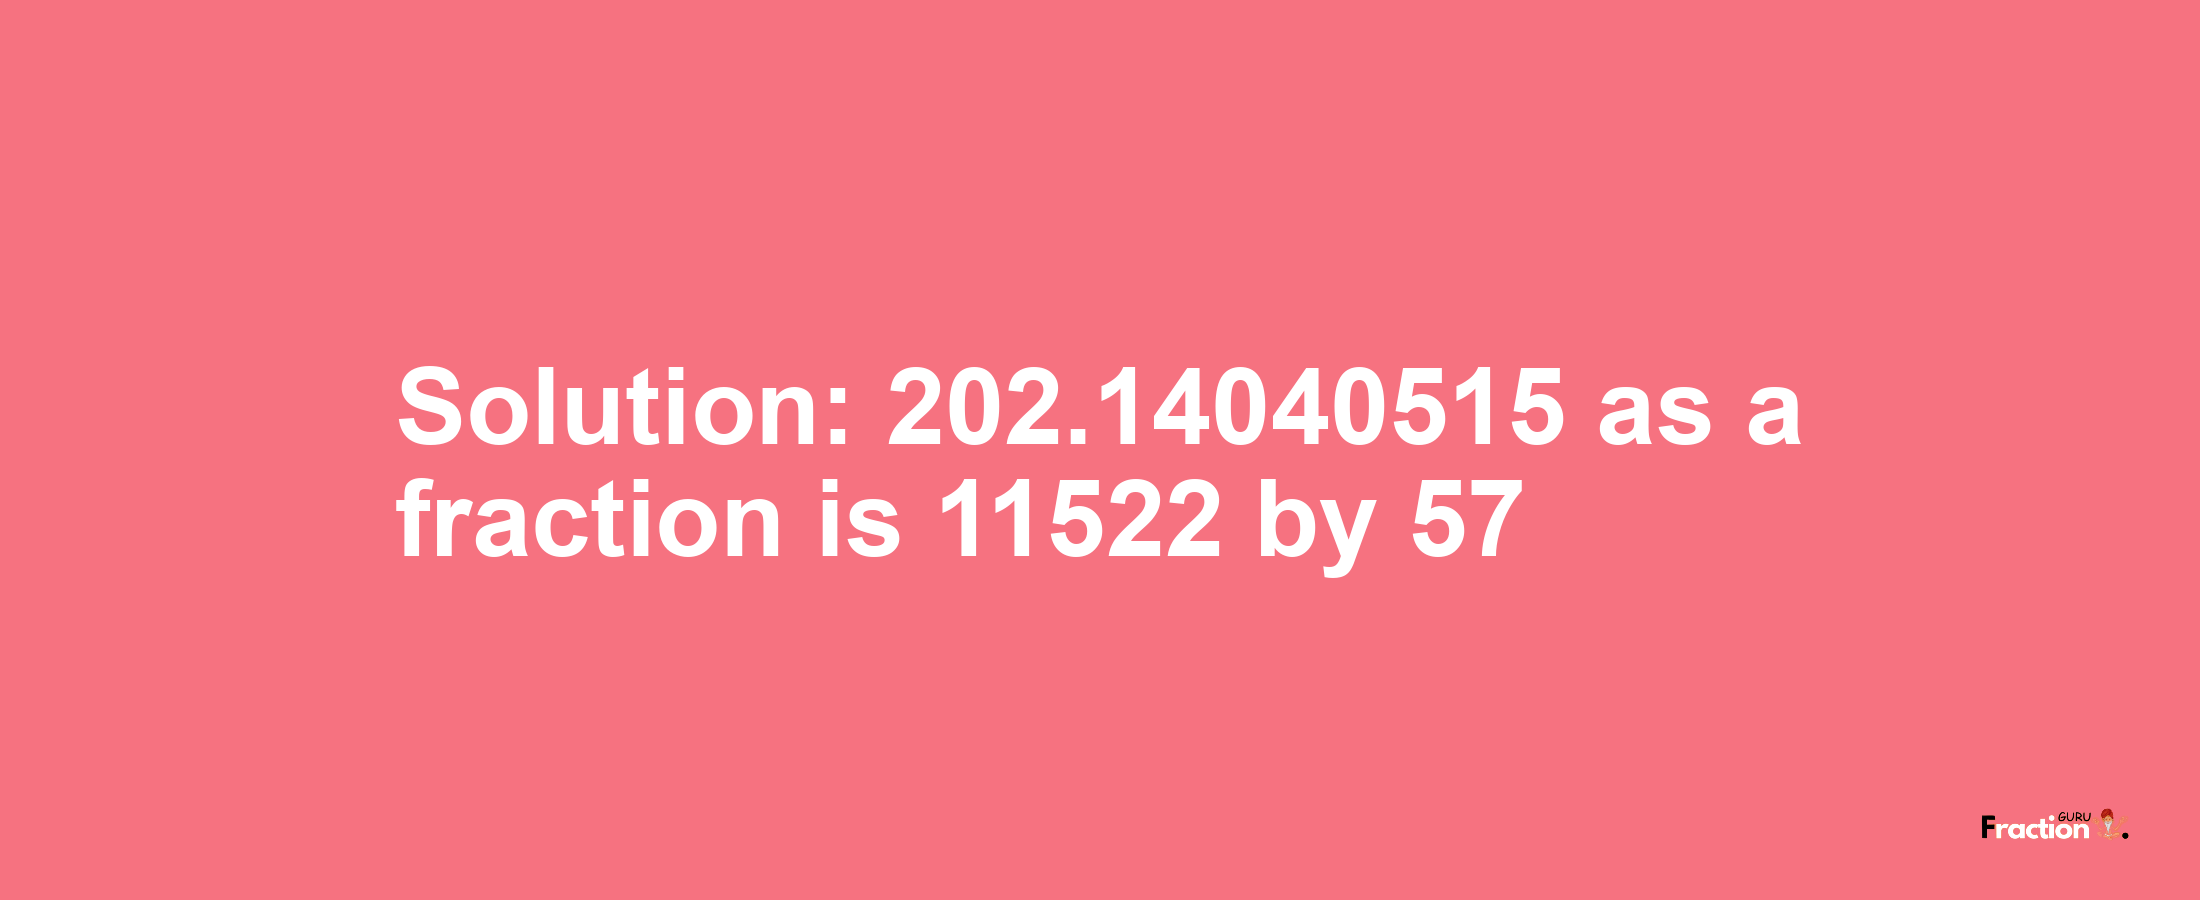 Solution:202.14040515 as a fraction is 11522/57